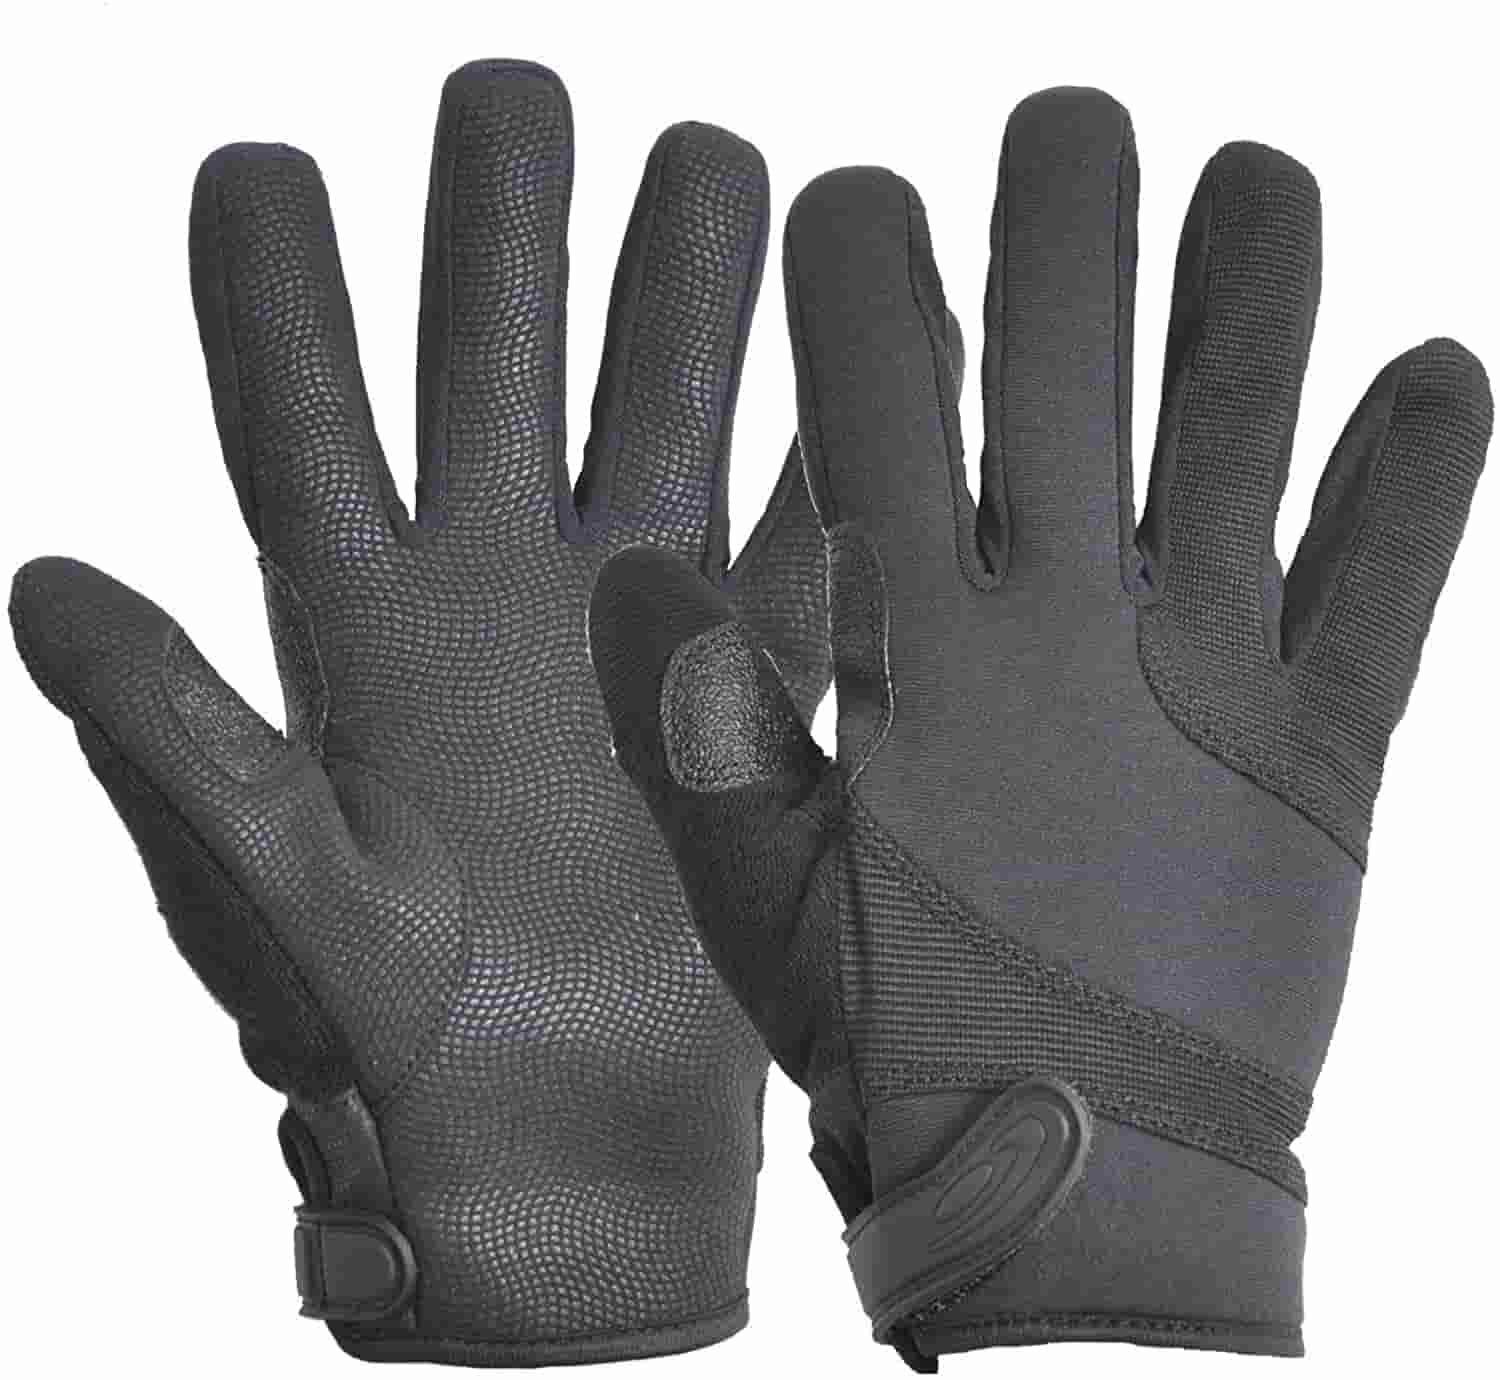 Tactical Police Duty Glove